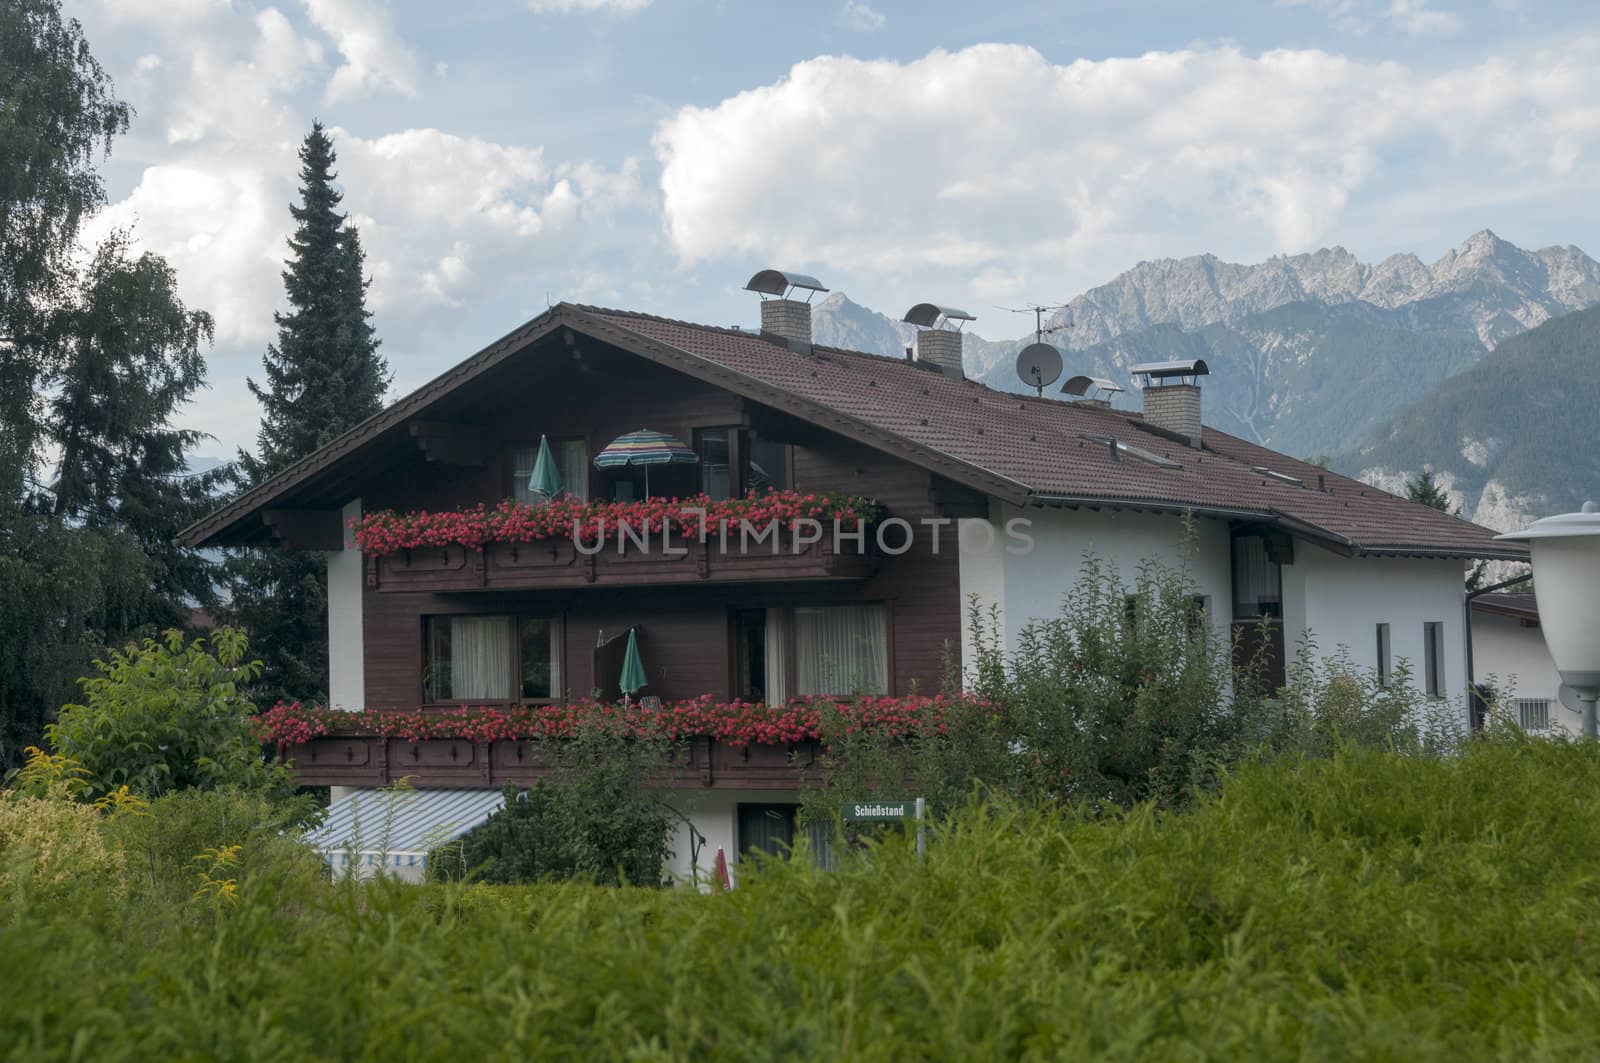 traditonal house in austria with red geranium flowers on the balcony